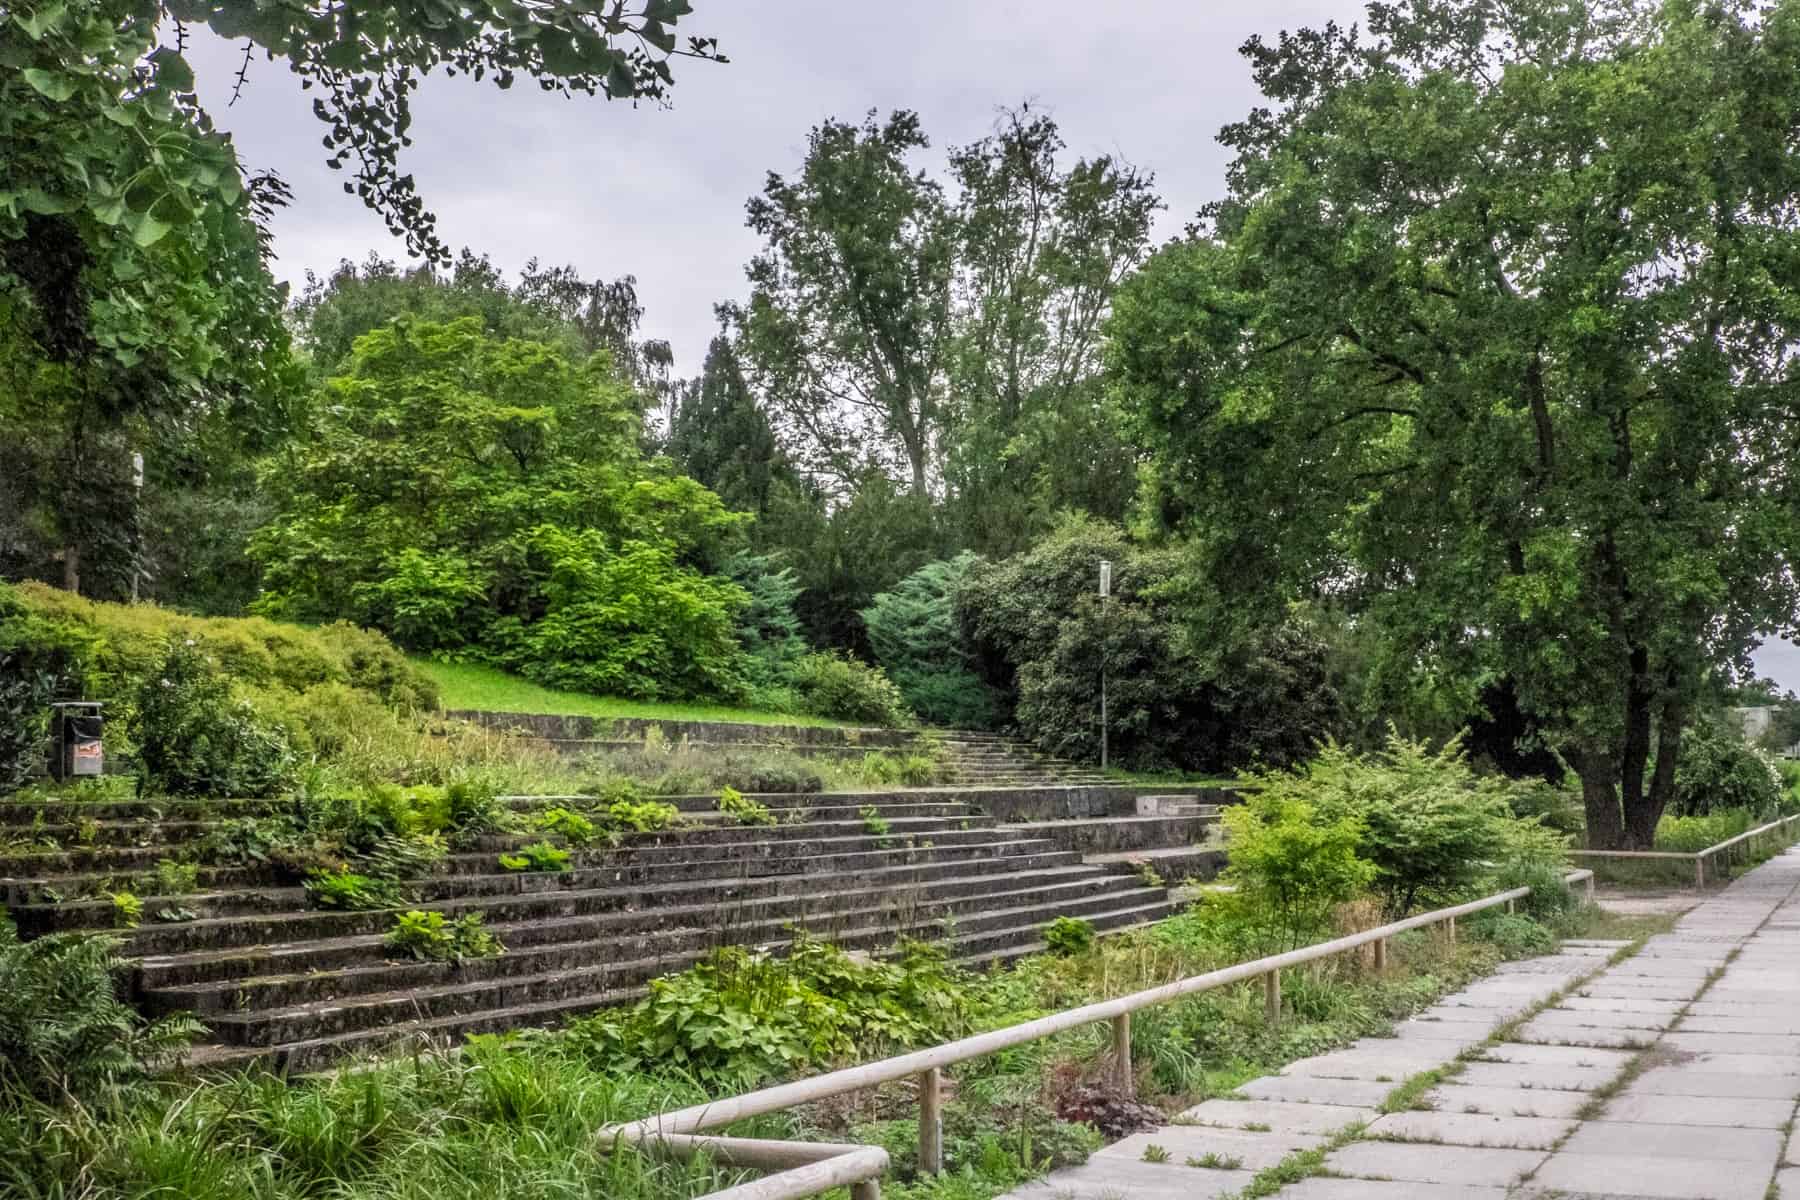 Grass, trees and green nature reclaims the structures of the Nuremberg Nazi Rally Grounds in Luitpoldhain